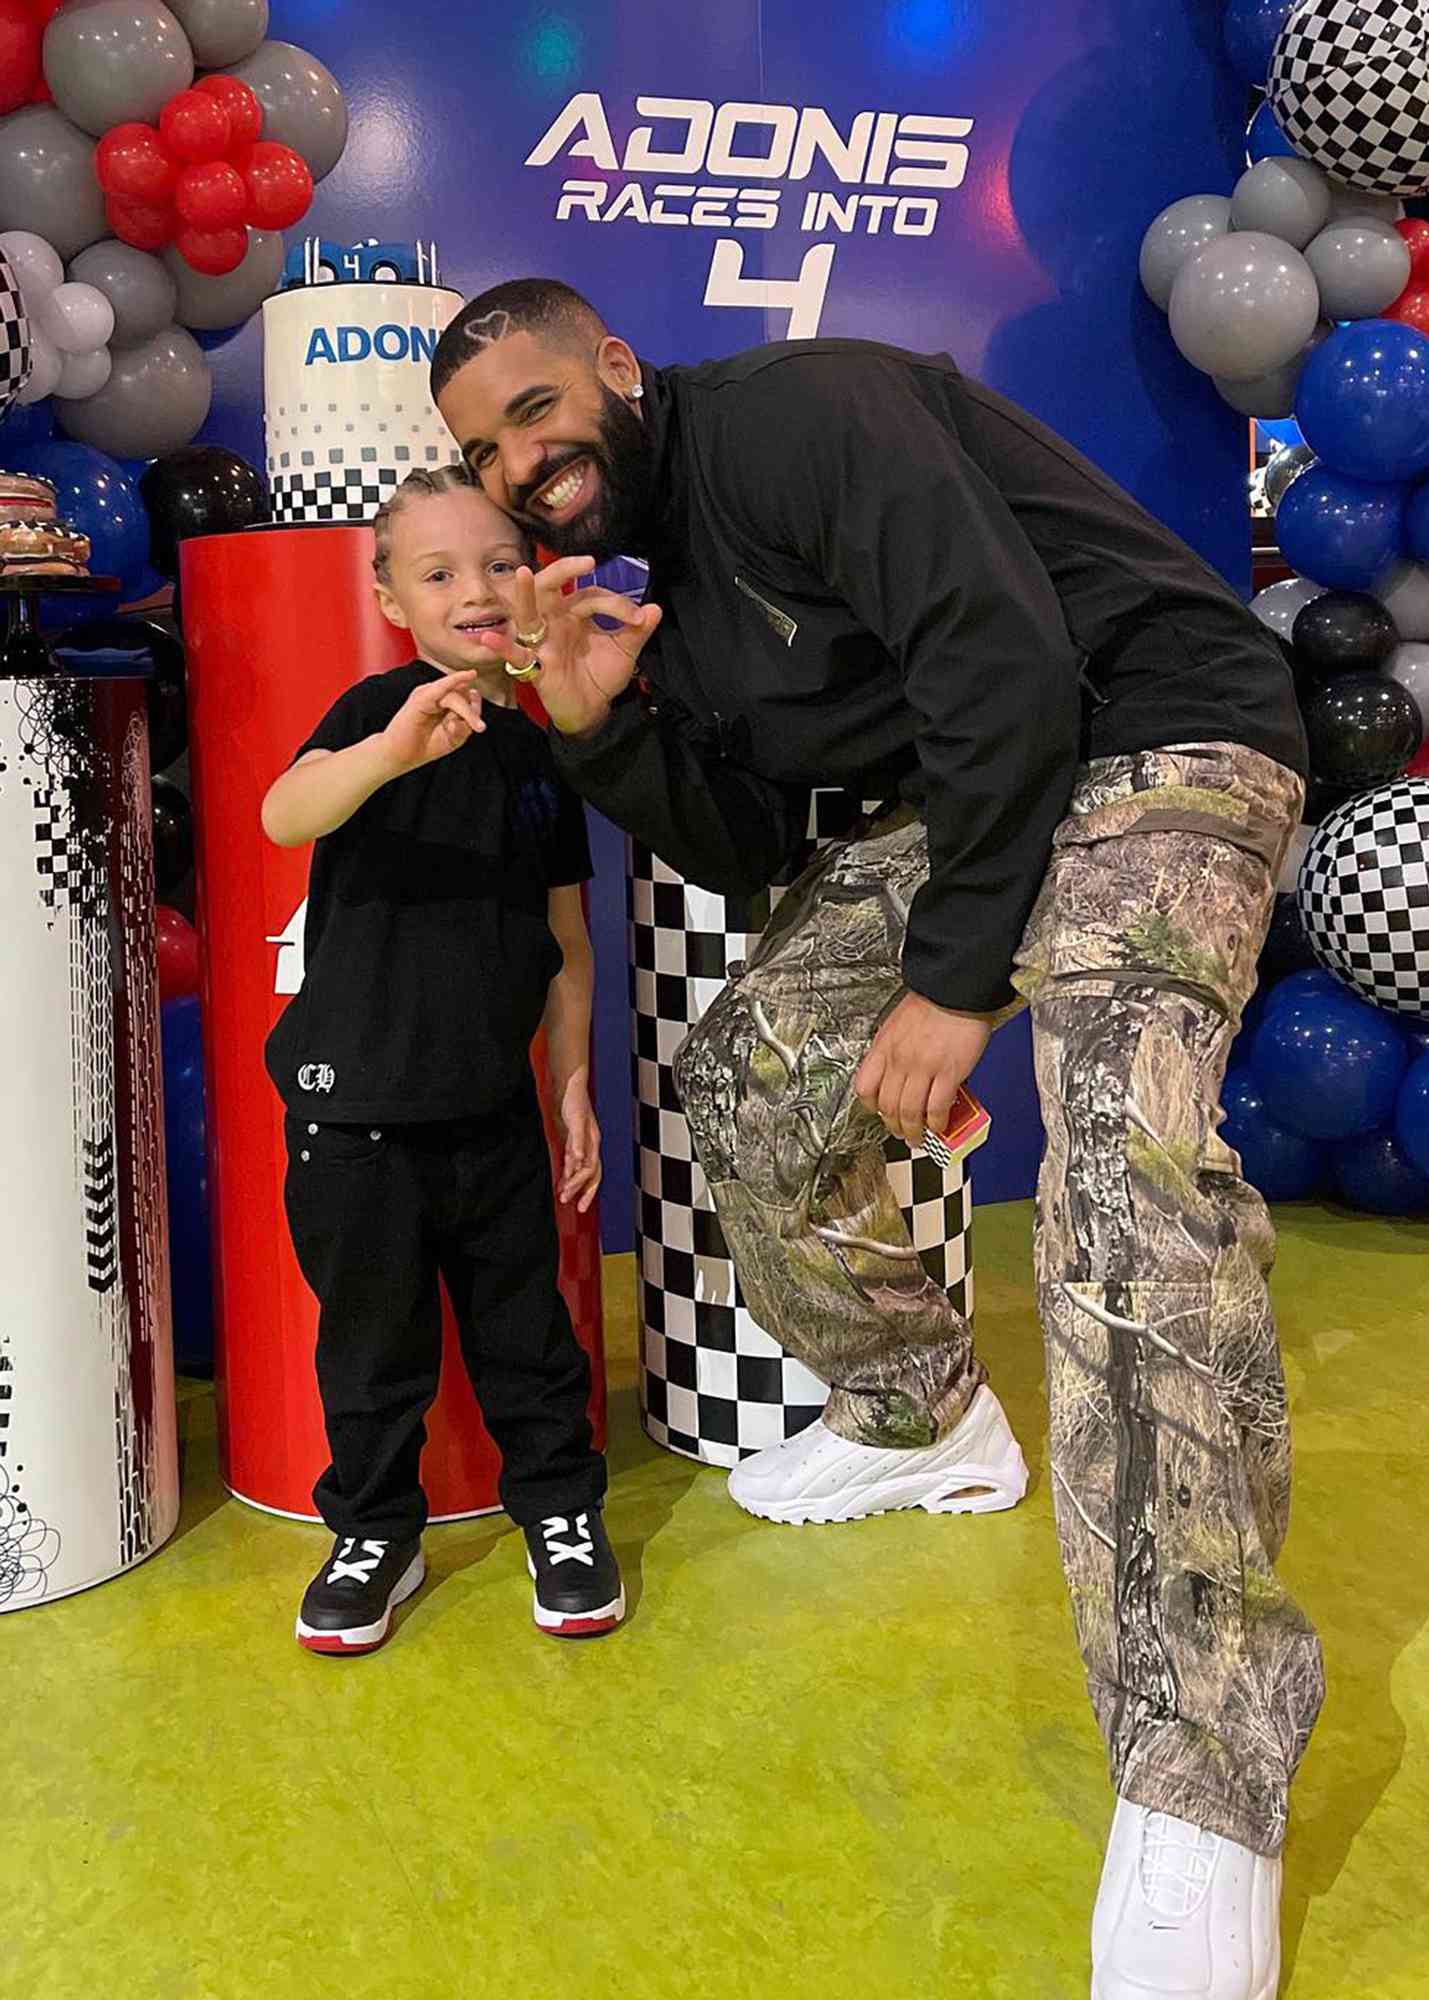 likhoa fans caught the moment drake took his son adonis and sophie brussaux to enjoy a happy time at the end of the year when christmas is near 655dc853f3427 Fans Caught The Moment Drake Took His Son Adonis And Sophie Brussaux To Enjoy A Happy Time At The End Of The Year When Christmas Is Near